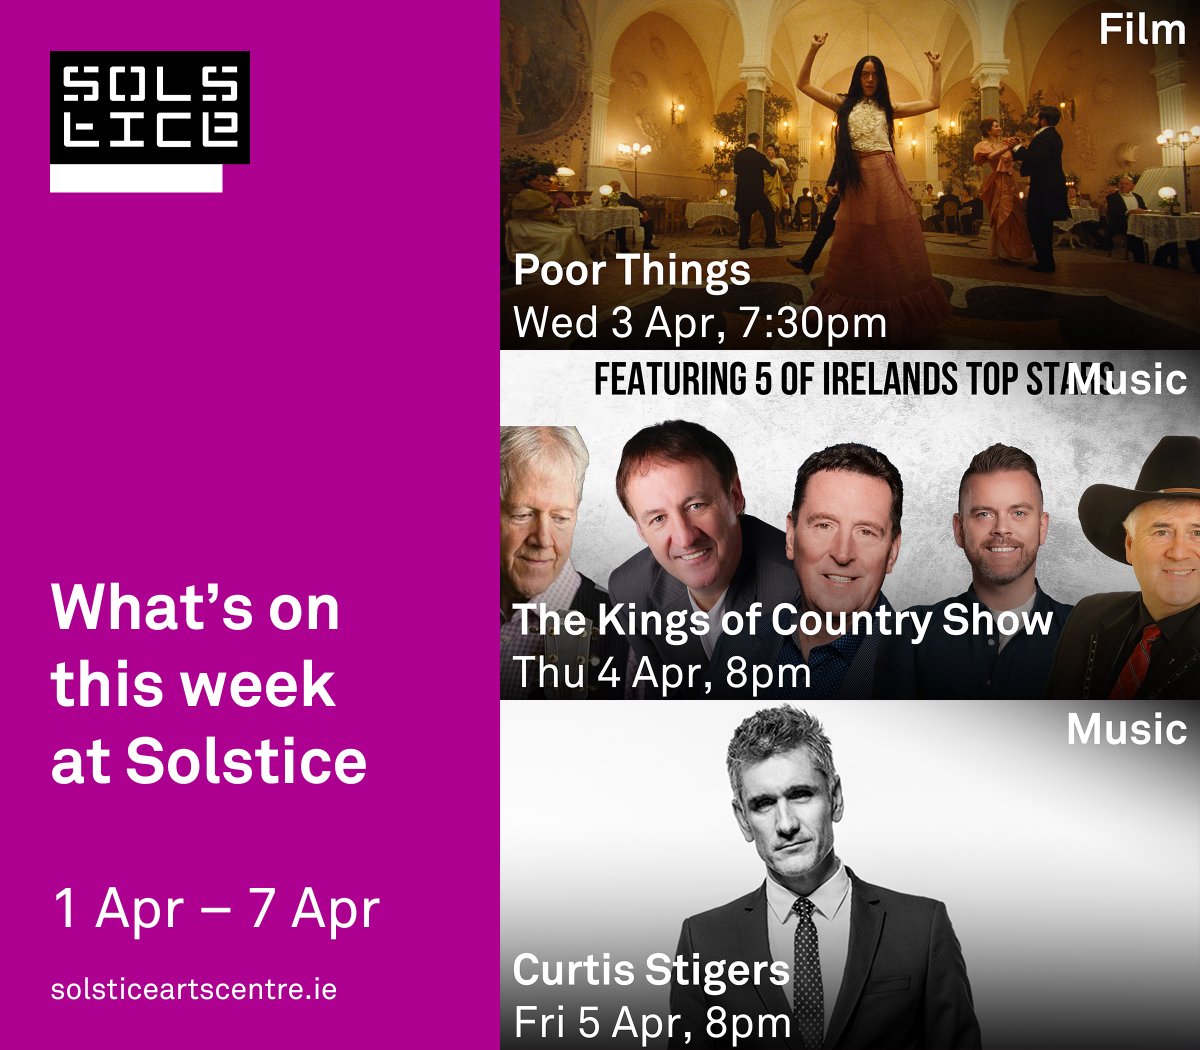 What’s on this week at Solstice: 🎬 Poor Things 🎷 Curtis Stigers 🤠 The Kings of Country Show Book now at solsticeartscentre.ie